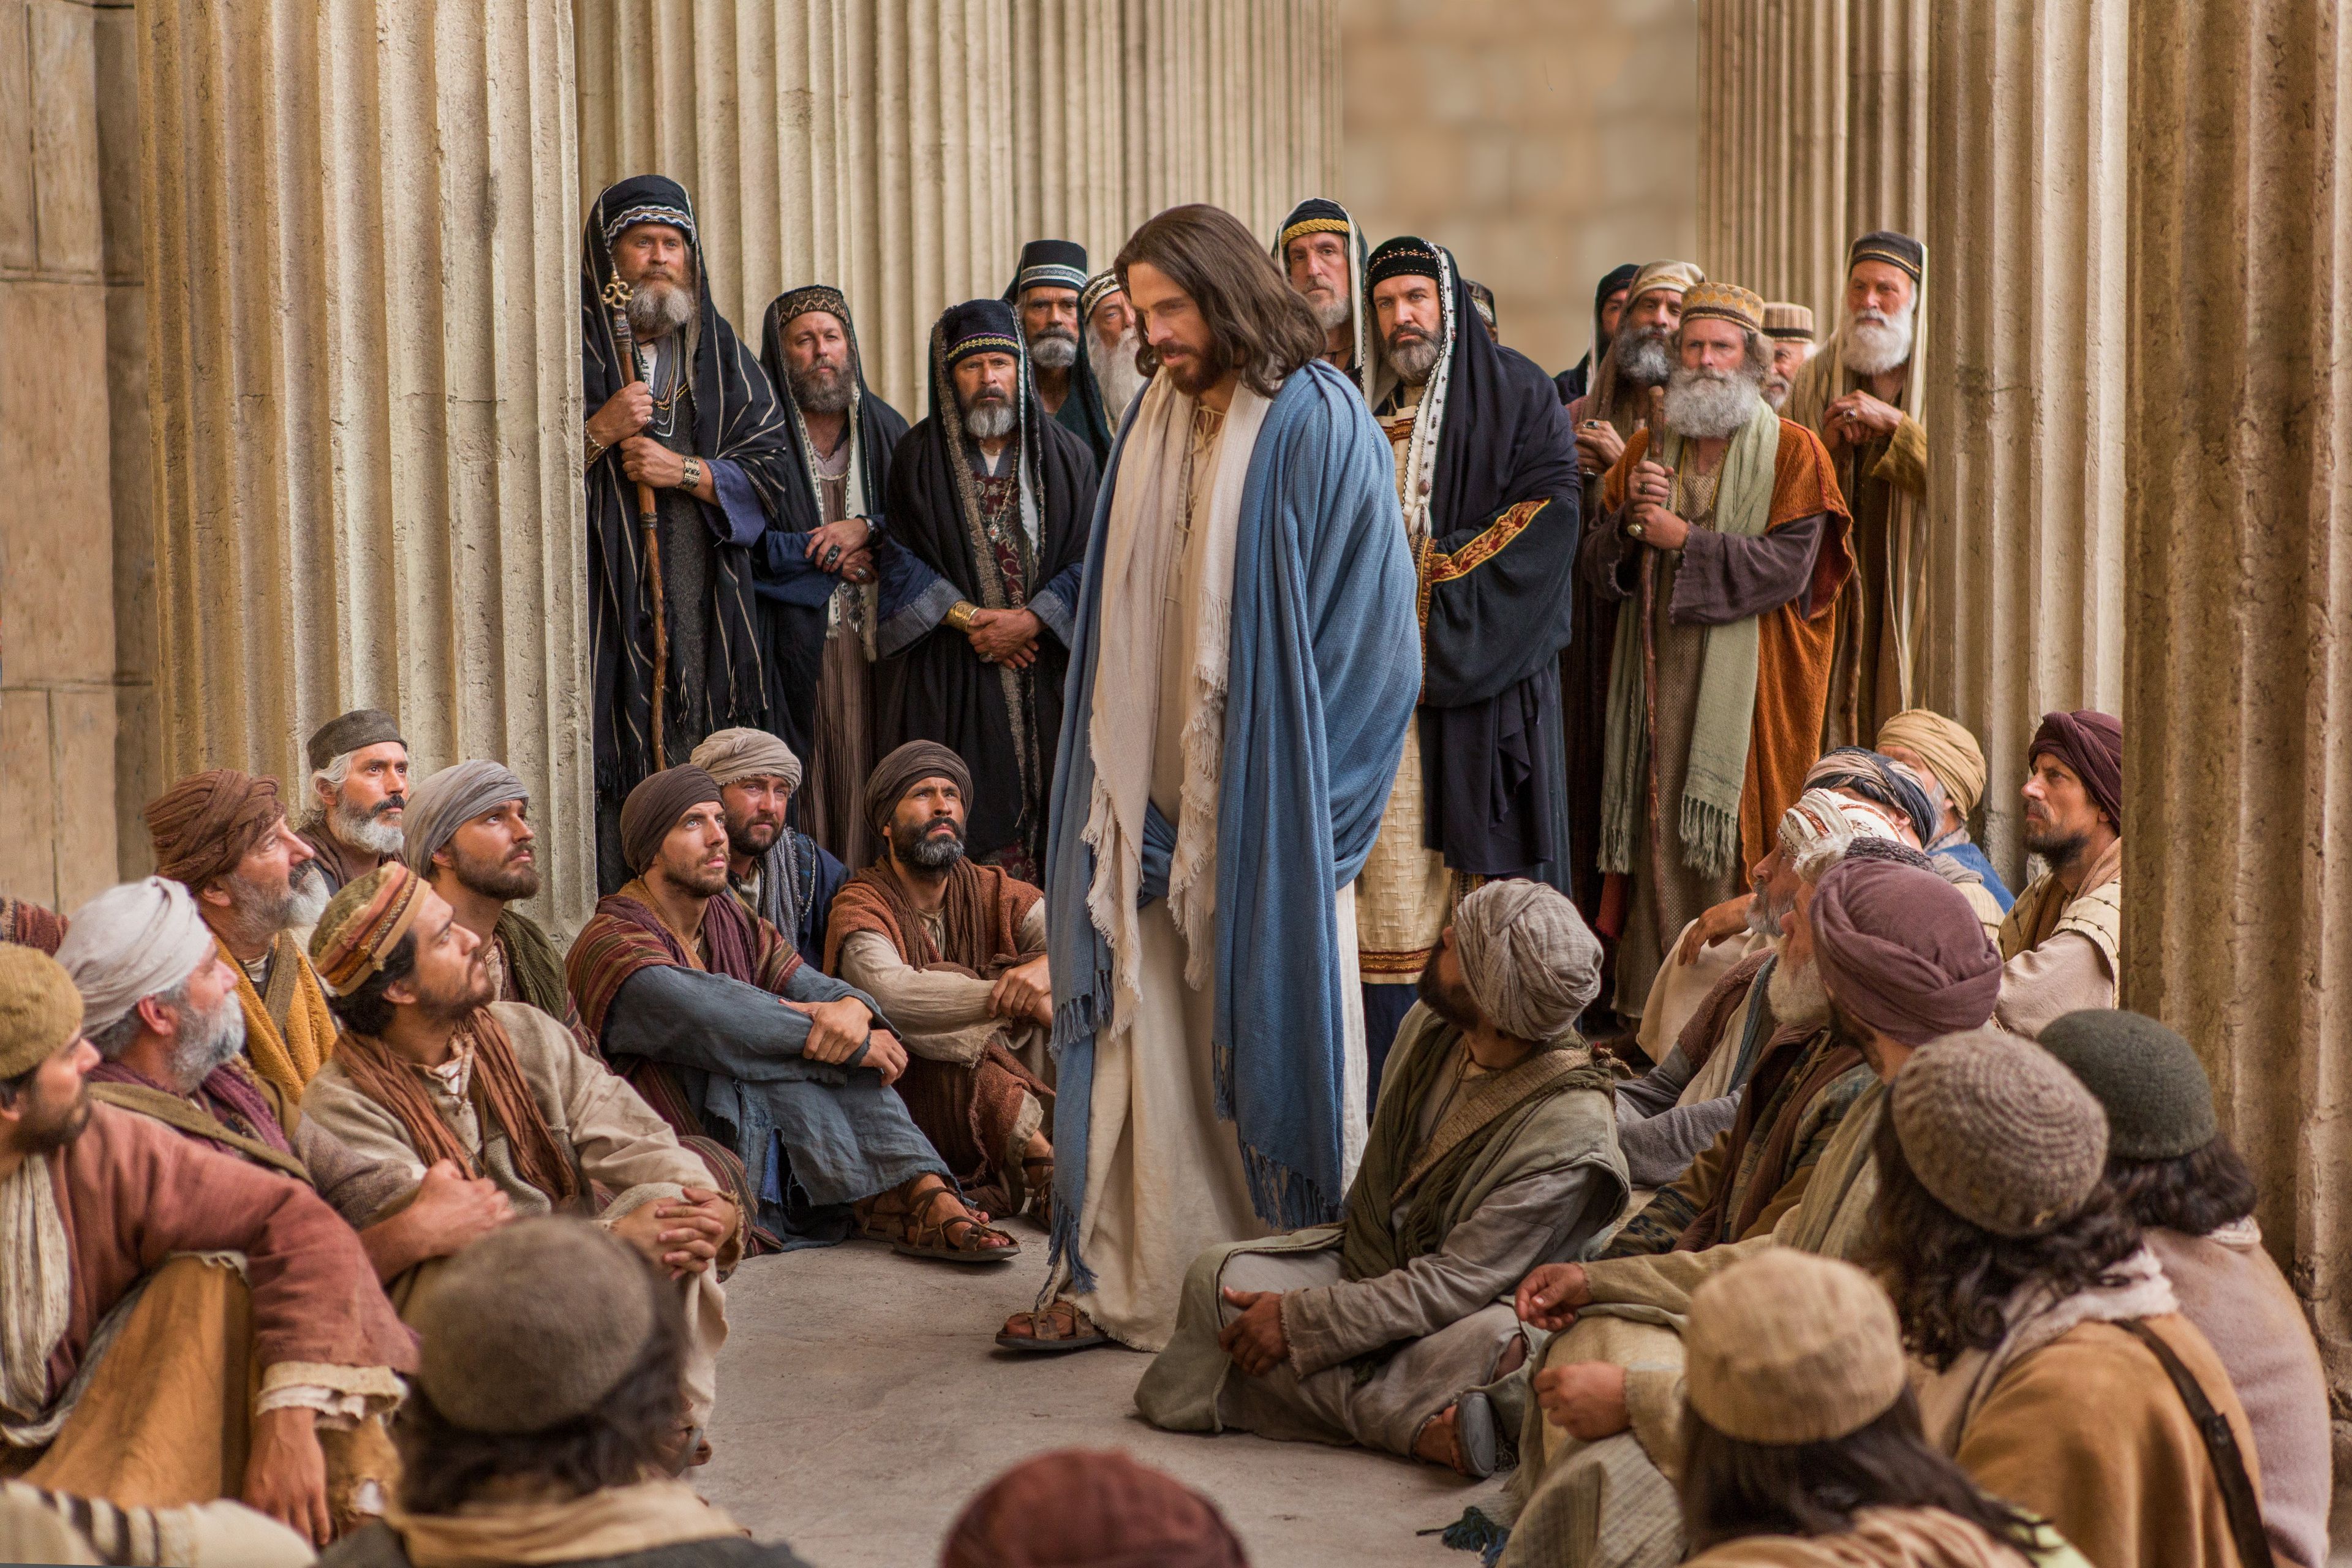 Jesus is questioned by Pharisees, and He teaches them.